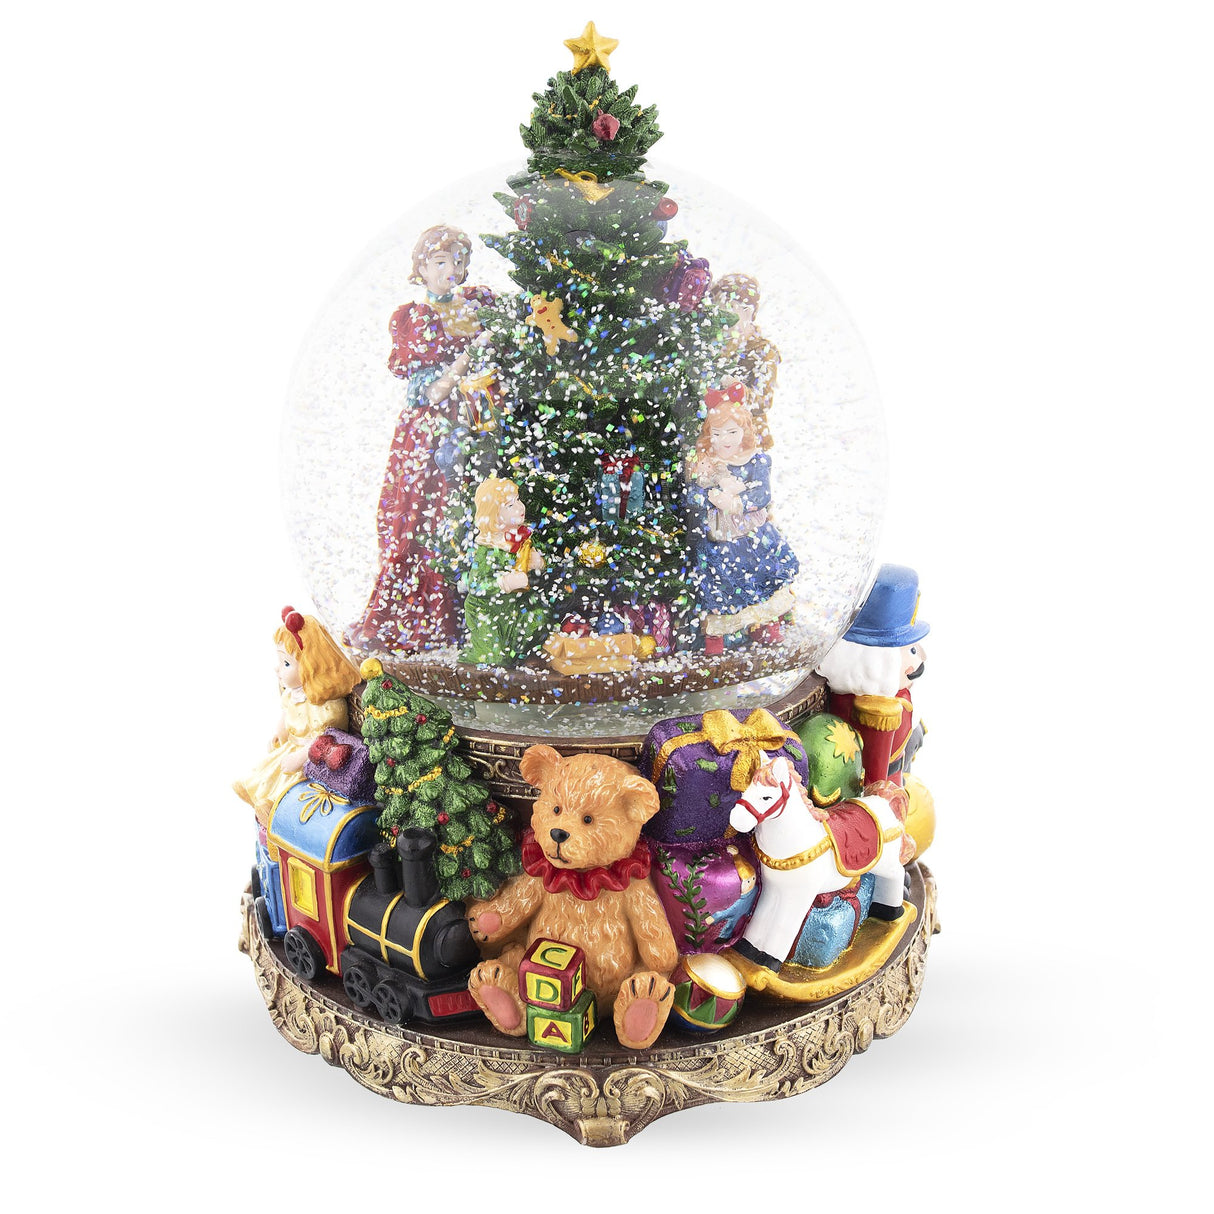 Shop Illuminated Tree Magic: LED Lights Musical Water Snow Globe, 9.6 Inches, with Children Decorating Christmas Tree. Buy Snow Globes Santa Multi Round Resin for Sale by Online Gift Shop BestPysanky Christmas water globe snowglobe music box musical collectible figurine xmas holiday decorations gifts rotating animated spinning animated unique picture personalized cool glitter flakes festive wind-up